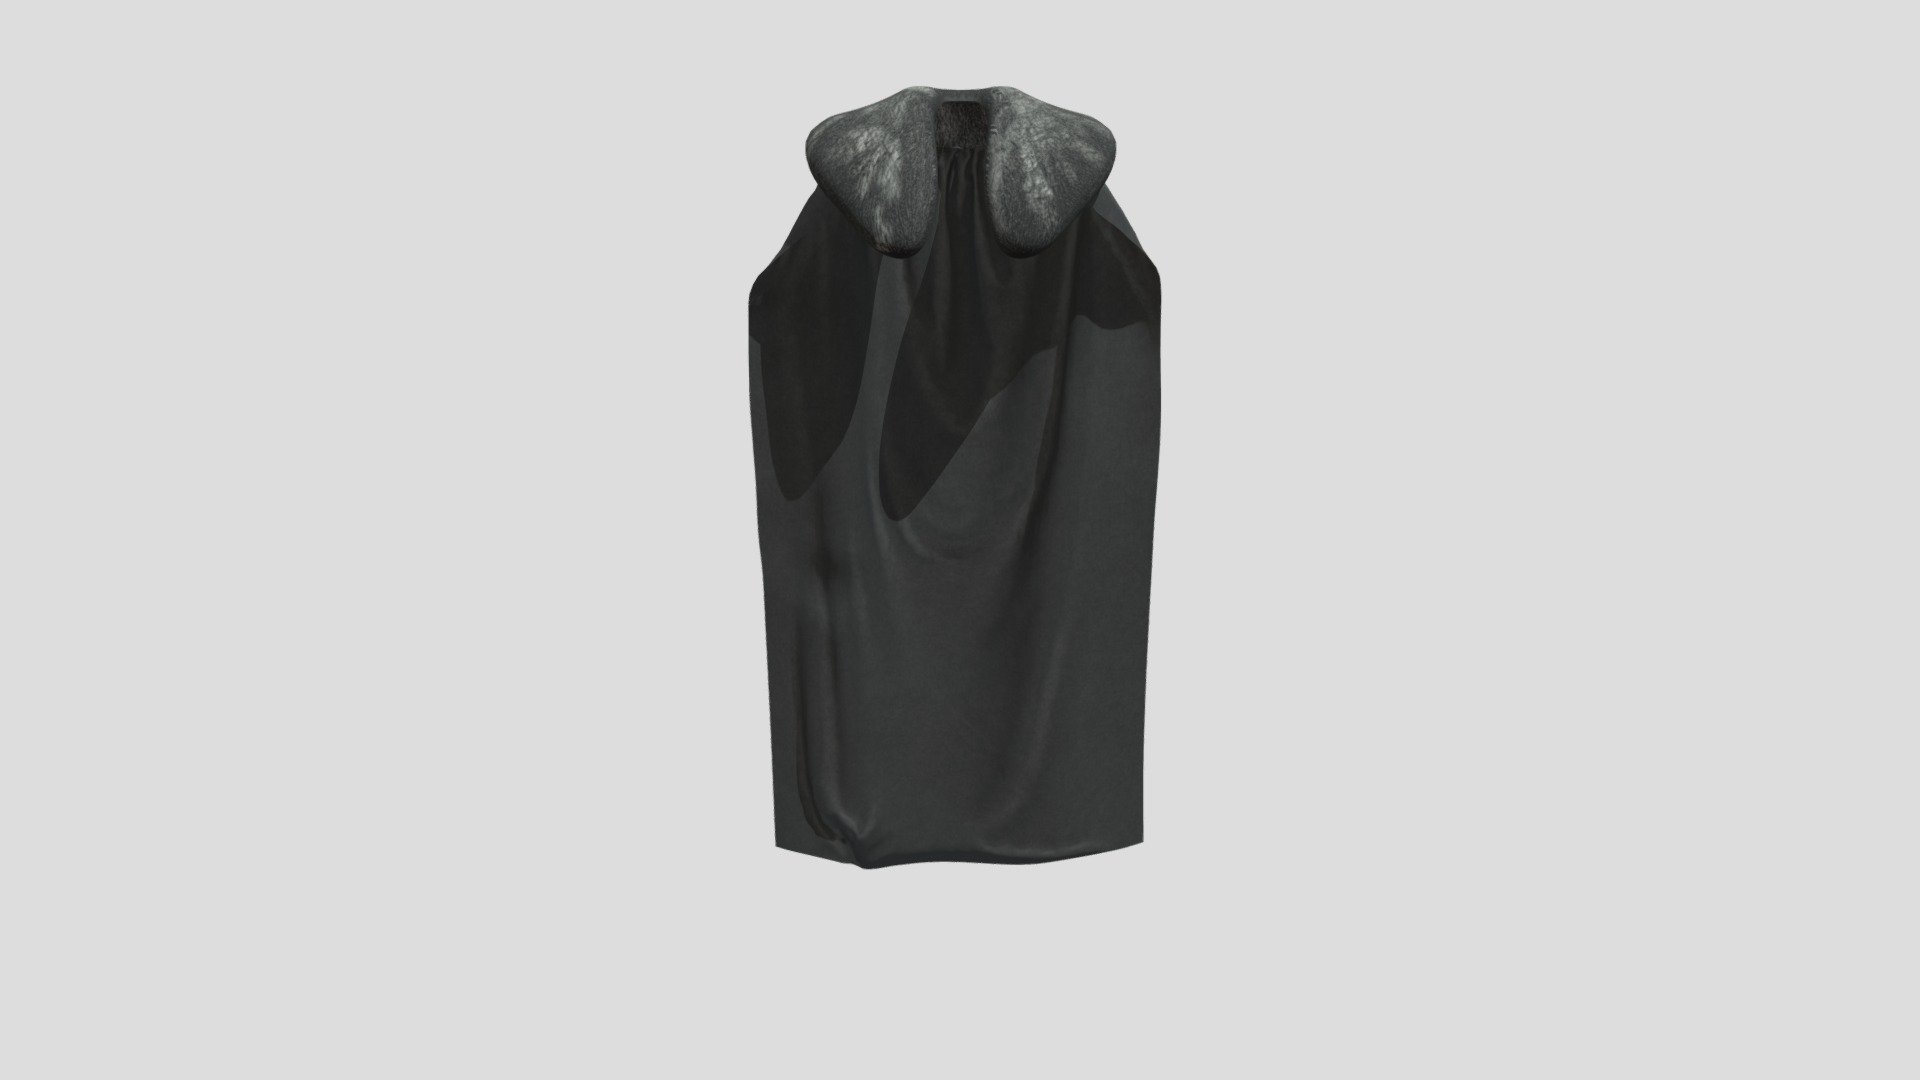 This package contains a detailed 3D model of a Fur Collar Cape. The model represents a cape design with high-quality fur details. This model can be used for various applications such as costume design, fashion illustration, or 3D printing projects.

The model is provided in OBJ format, a common file format used in 3D modeling software. This allows the model to be easily opened and edited in various 3D software. Accompanying the OBJ file is an MTL file, which contains information about the material properties of the model, such as color, texture, and reflectivity. This helps to render the model with more realism.

Please ensure your software supports OBJ and MTL files before using the model. Also, check the dimensions of the model to ensure it is at the correct scale and suitable for your project 3d model